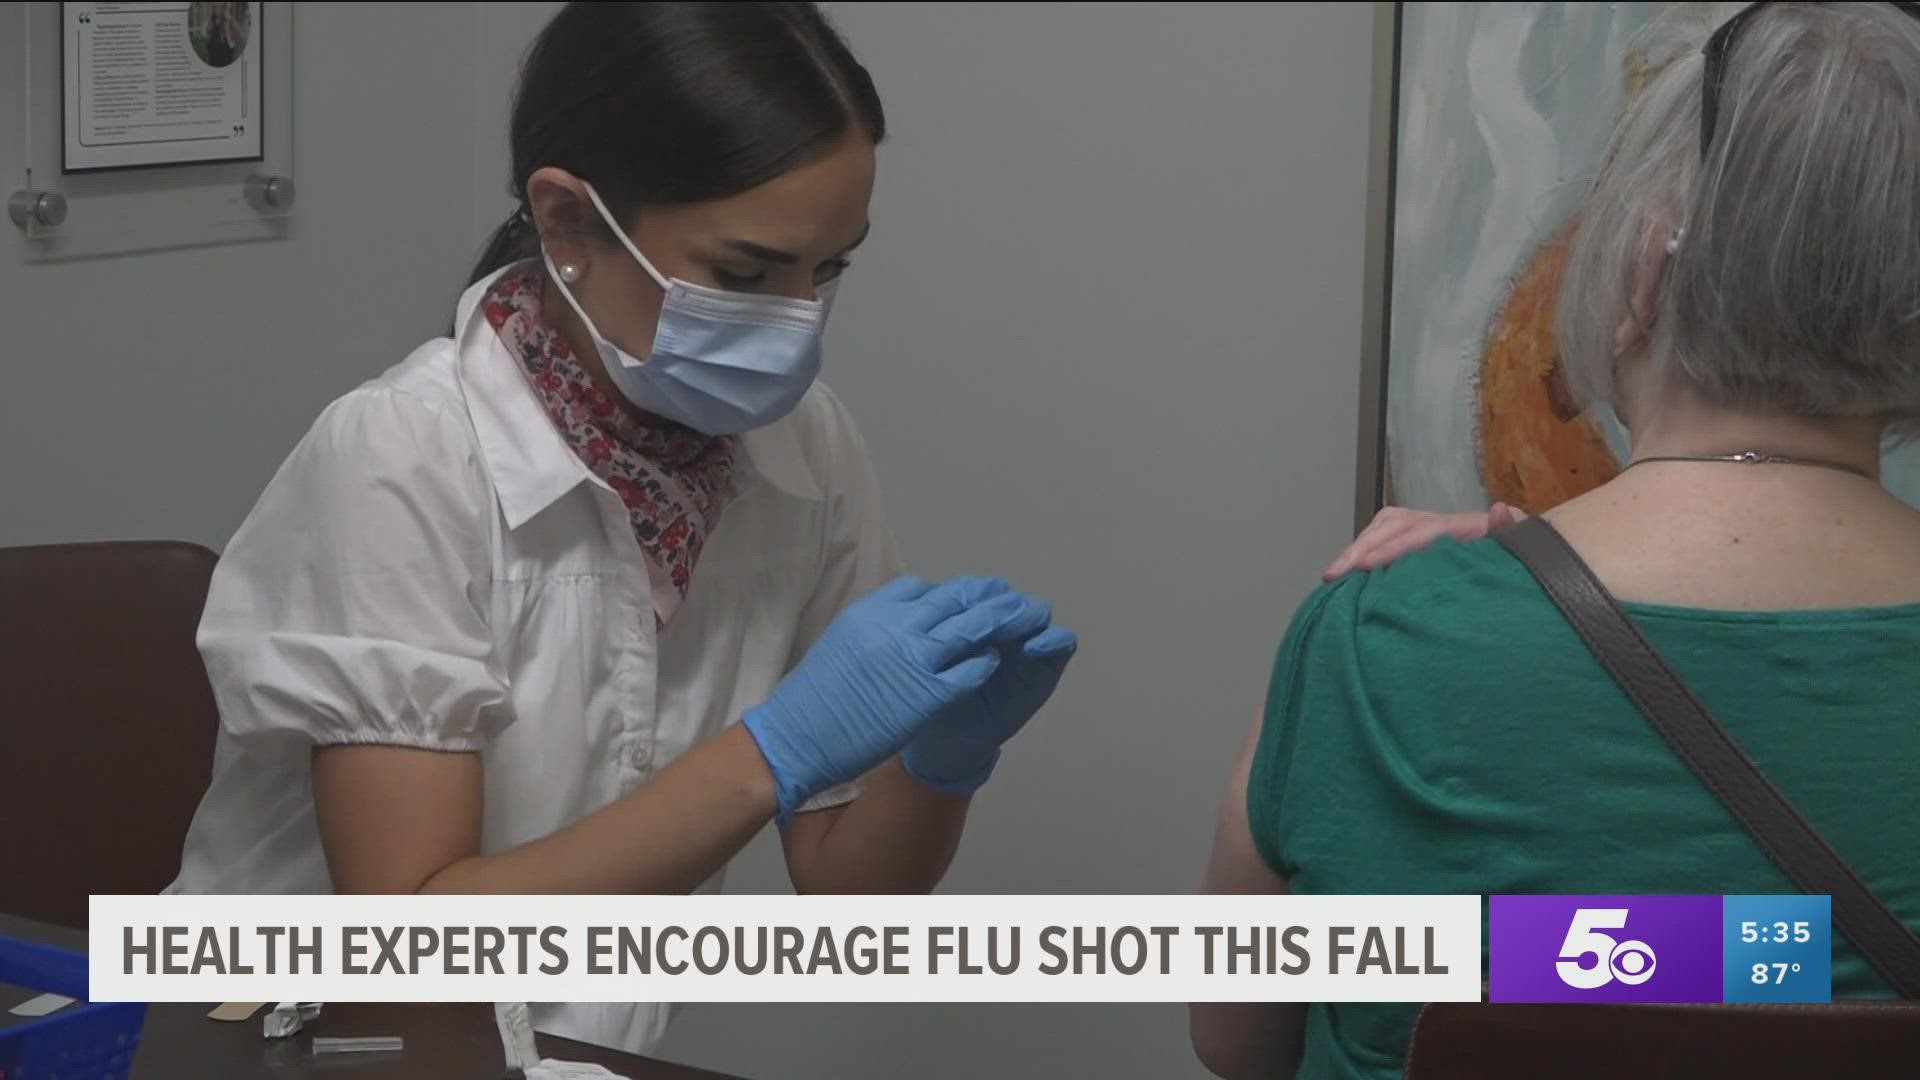 Health experts are encouraging Arkansans to get their flu shot this fall as the coronavirus pandemic continues.